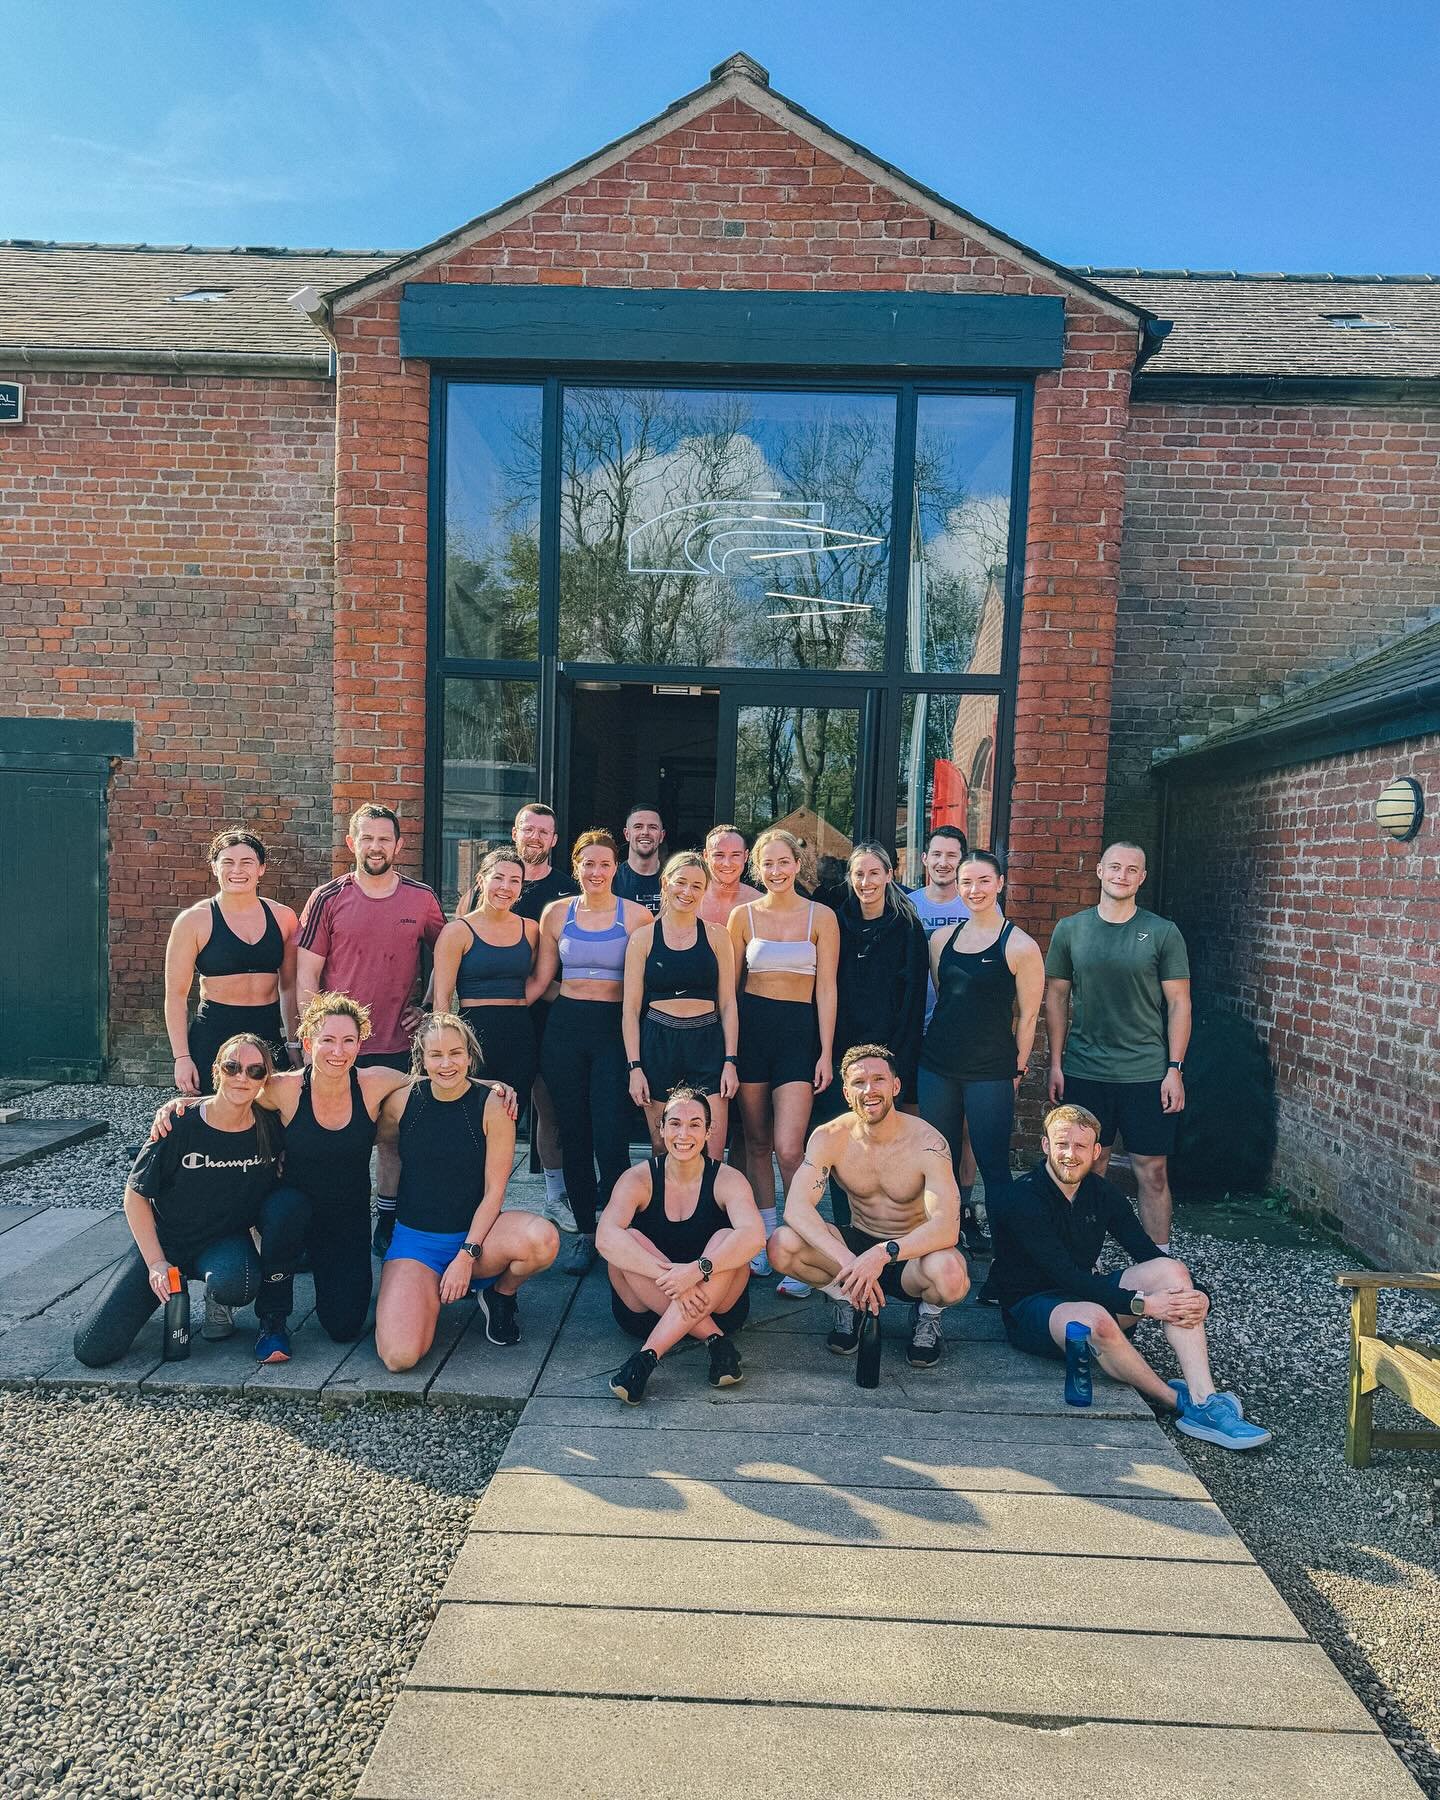 TEAM TRAINING SATURDAYS 😮&zwj;💨⛽️

It was nice to have some sun for yesterday&rsquo;s &ldquo;Team Training&rdquo; session yesterday morning. The team tackled a 3 person chipper for a 40 minute AMRAP. Swipe for the full workout!

If you&rsquo;d like